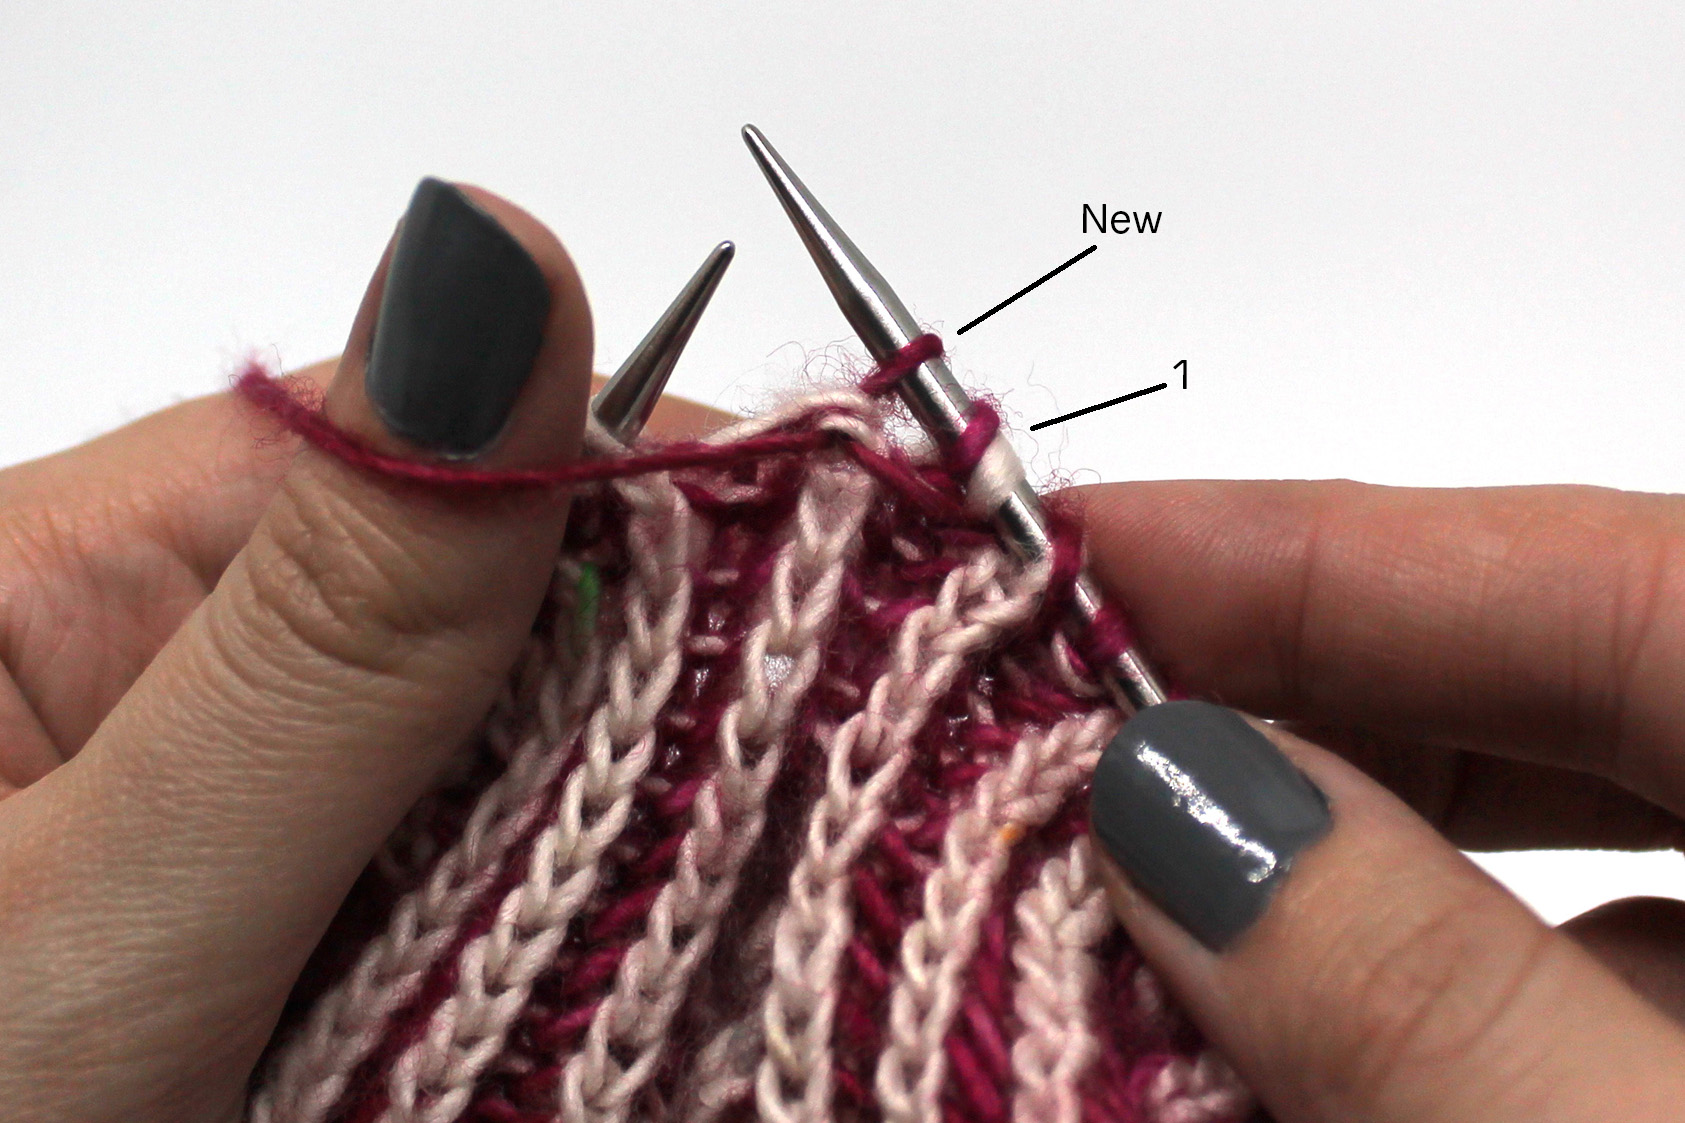 The stitch labelled "new" has been slipped to the right hand needle